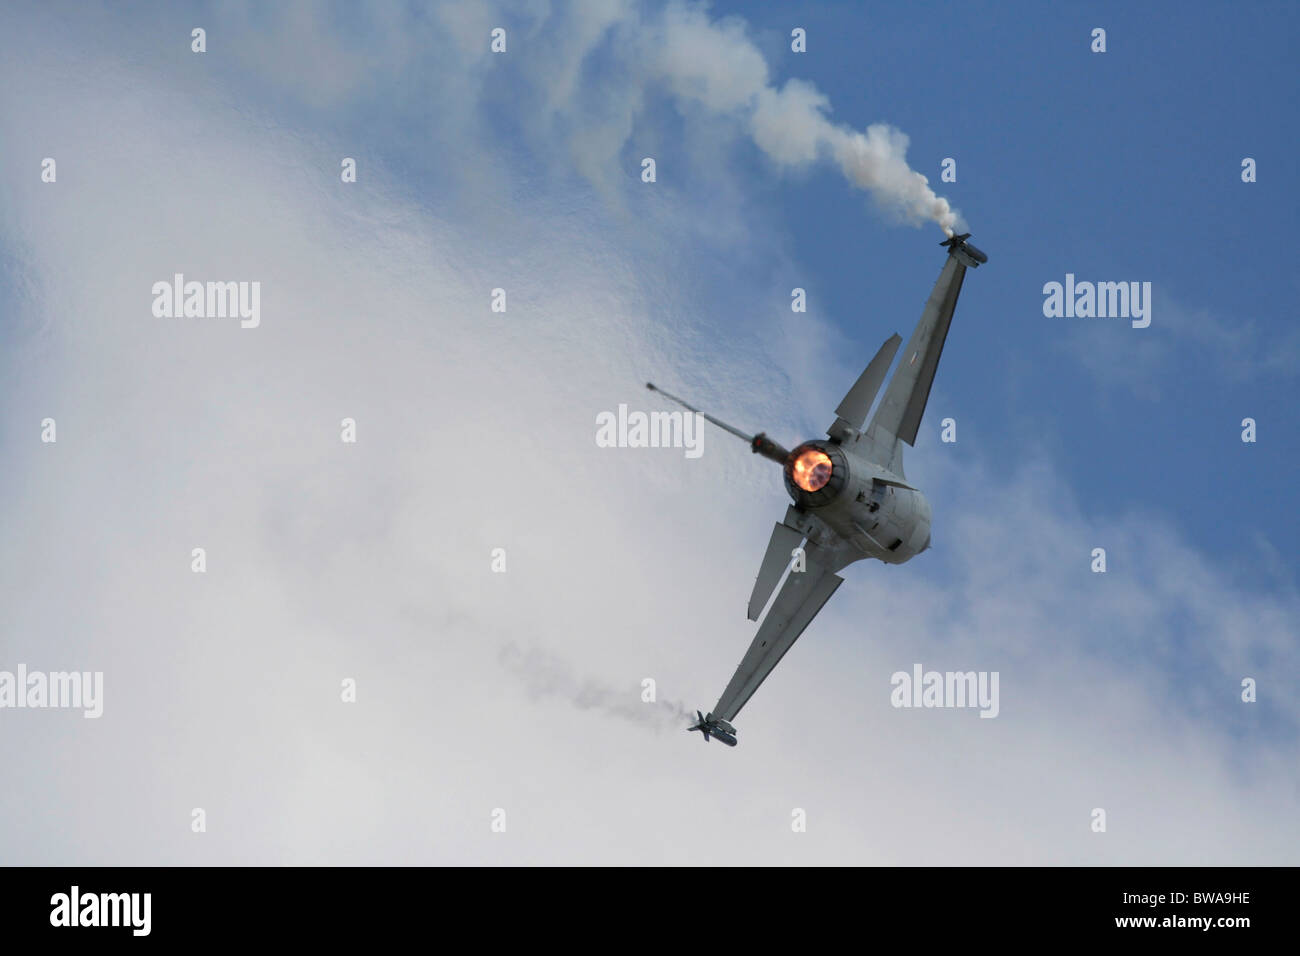 F-16 fighter jet plane flying and turning with afterburner on. Modern military aviation. Photo framed with copy space. Stock Photo